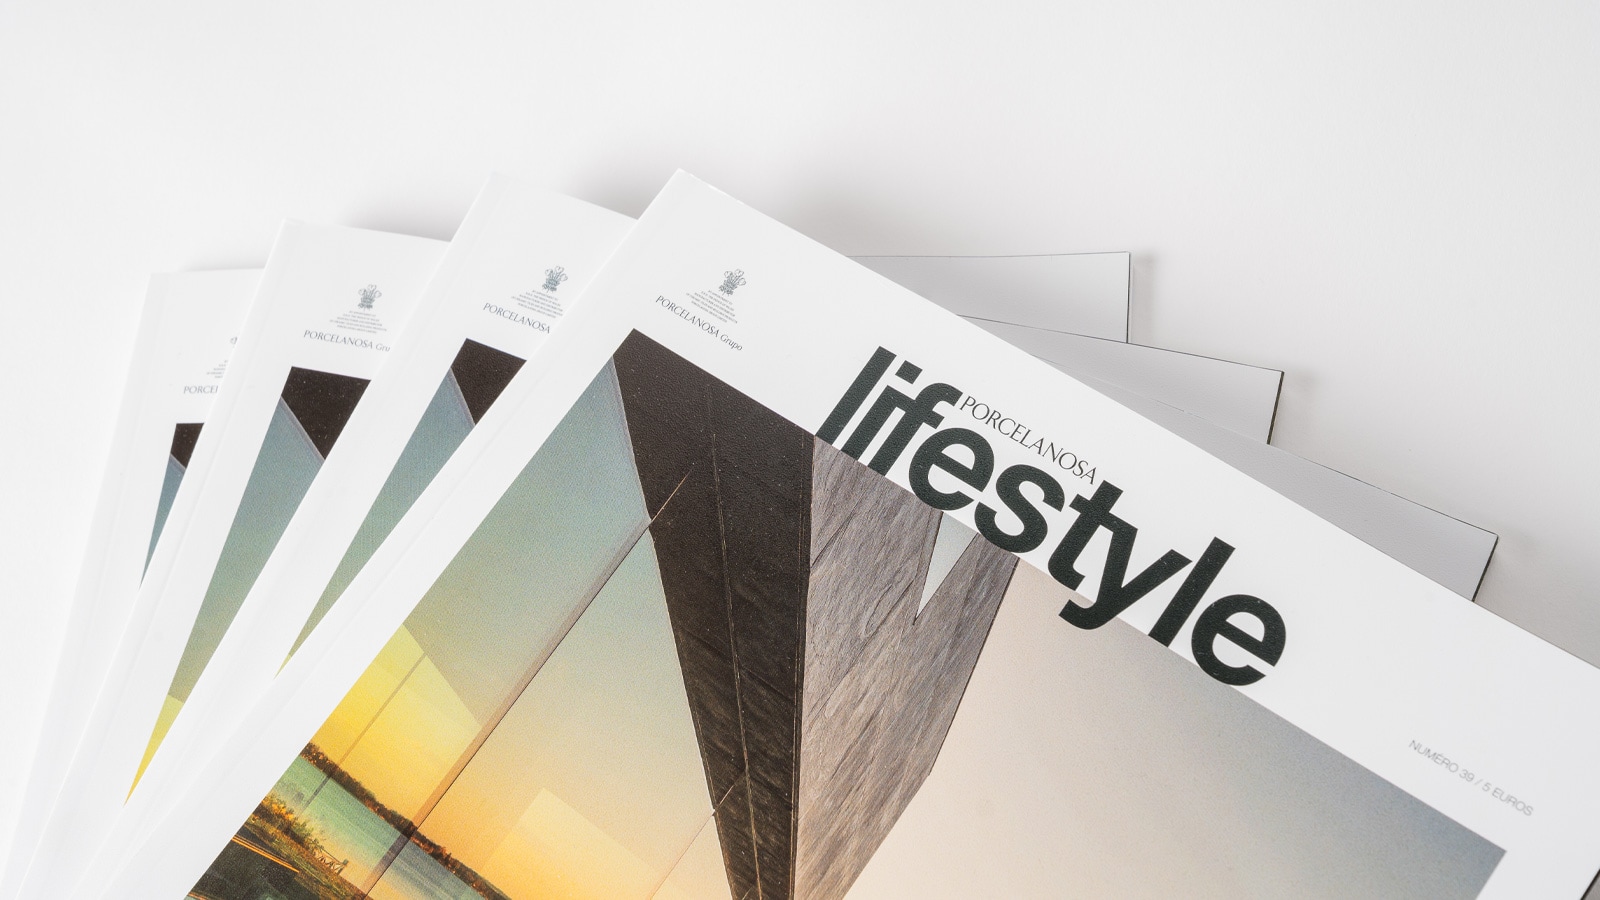 Designs from Calatrava and Lázaro Rosa-Violán's land on the pages of Lifestyle magazine